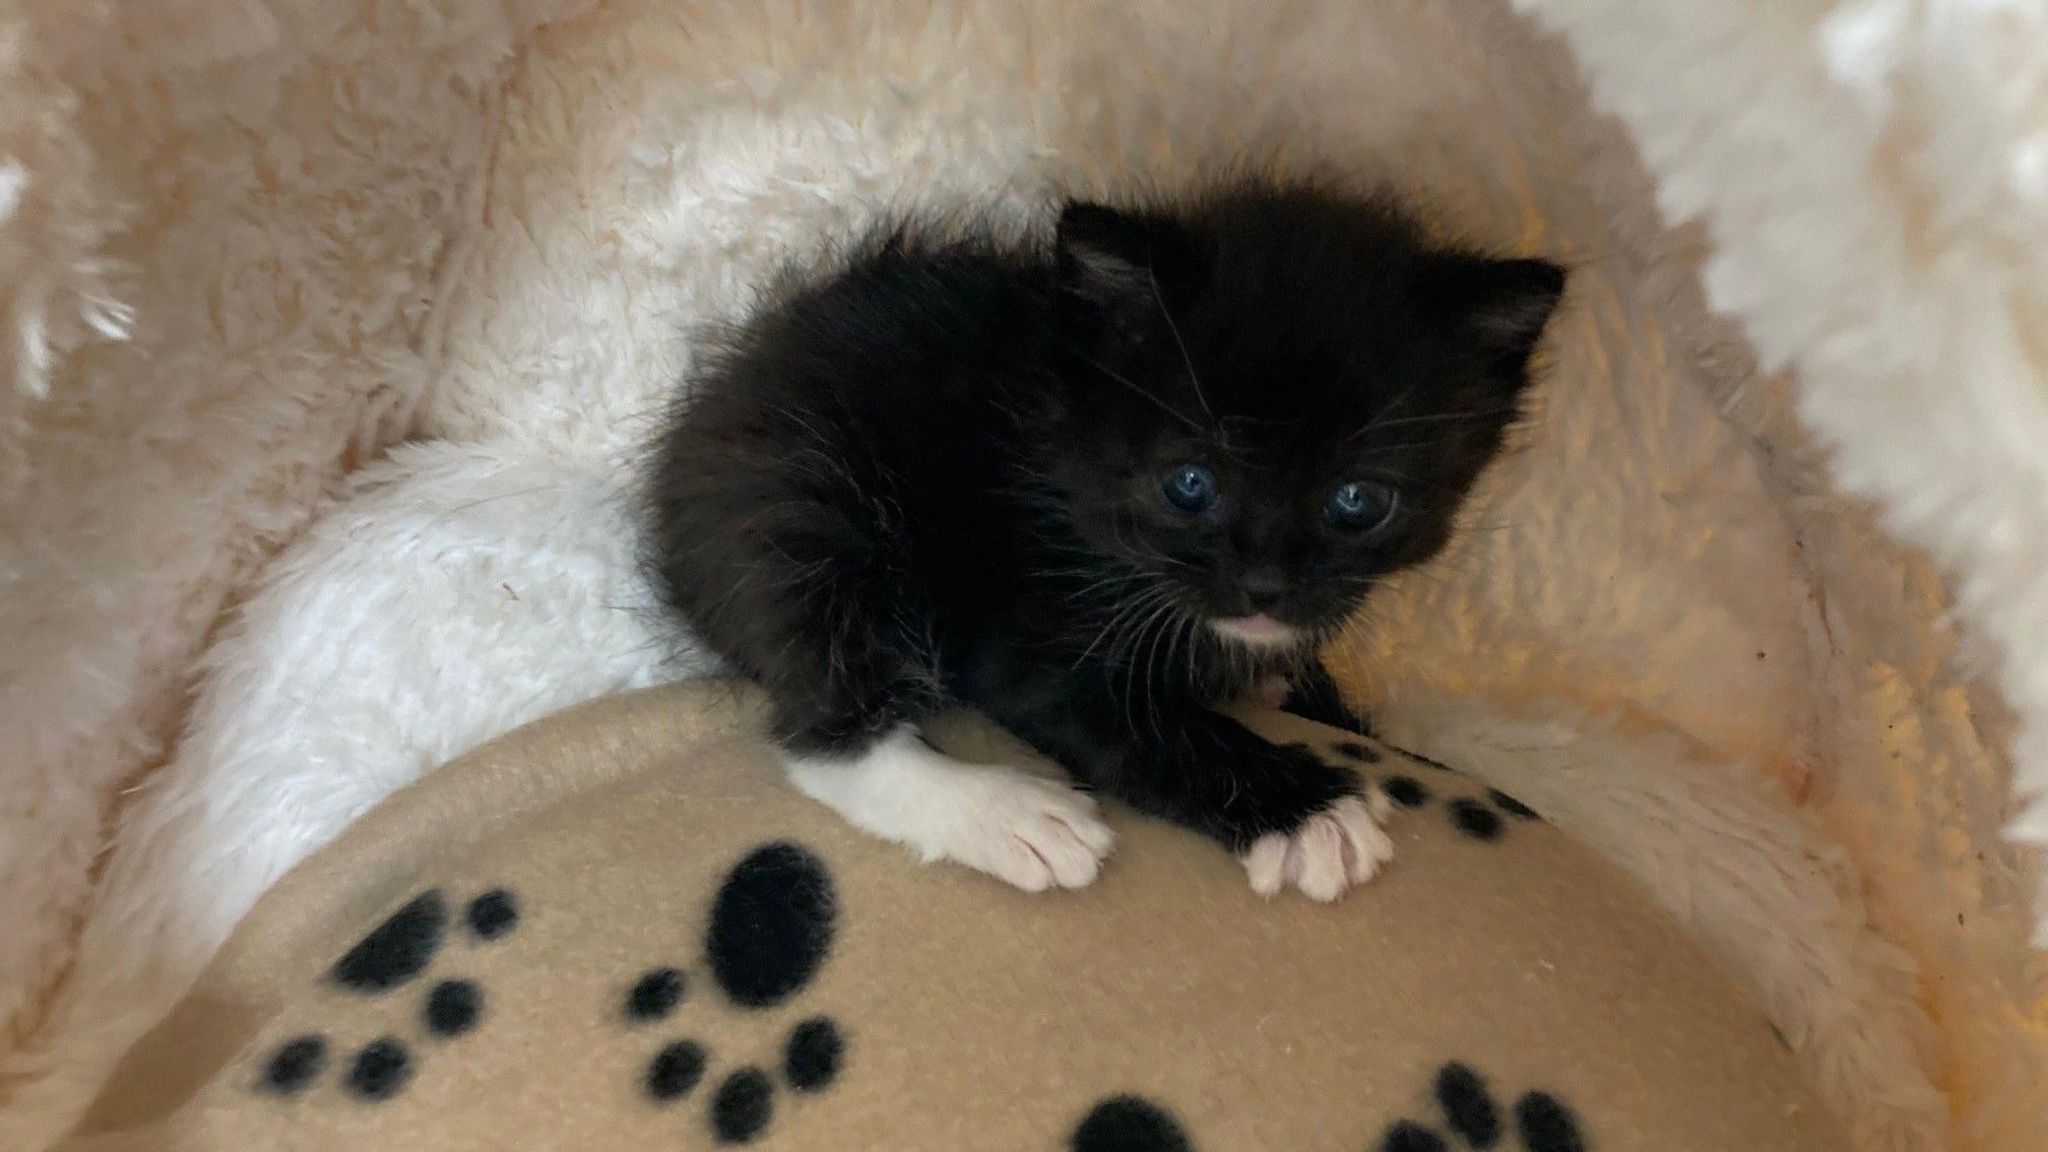 Three-week-old black and white kitten Taylor